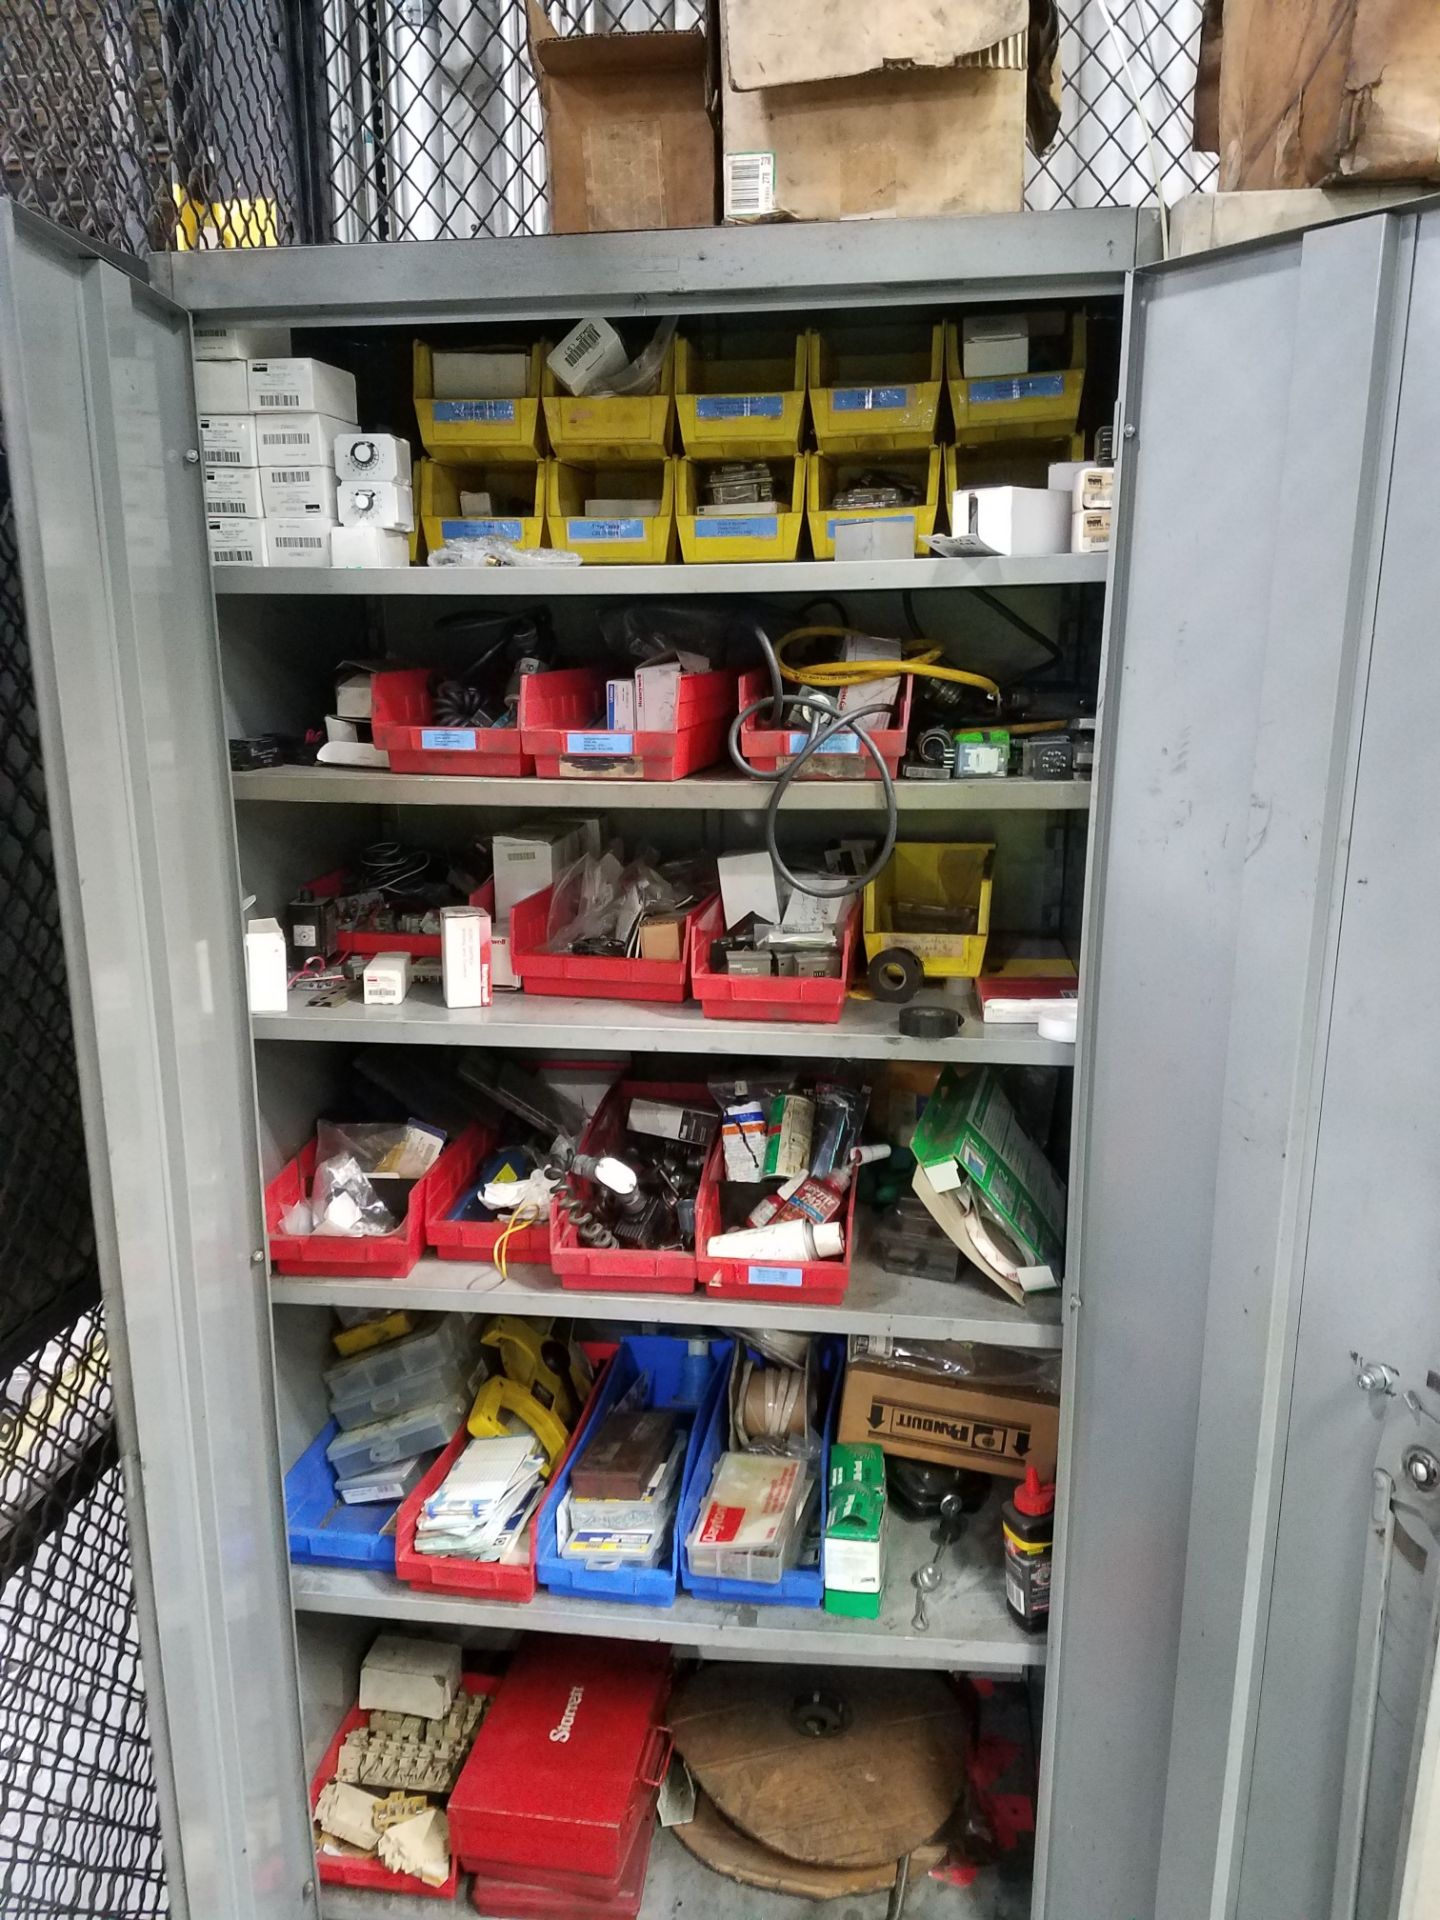 (LOT) REMAINING CONTENTS OF MAINTENANCE ROOM INCLUDING MOTORS, ELECTRICAL, MACHINE PARTS, VALVES, - Image 4 of 9